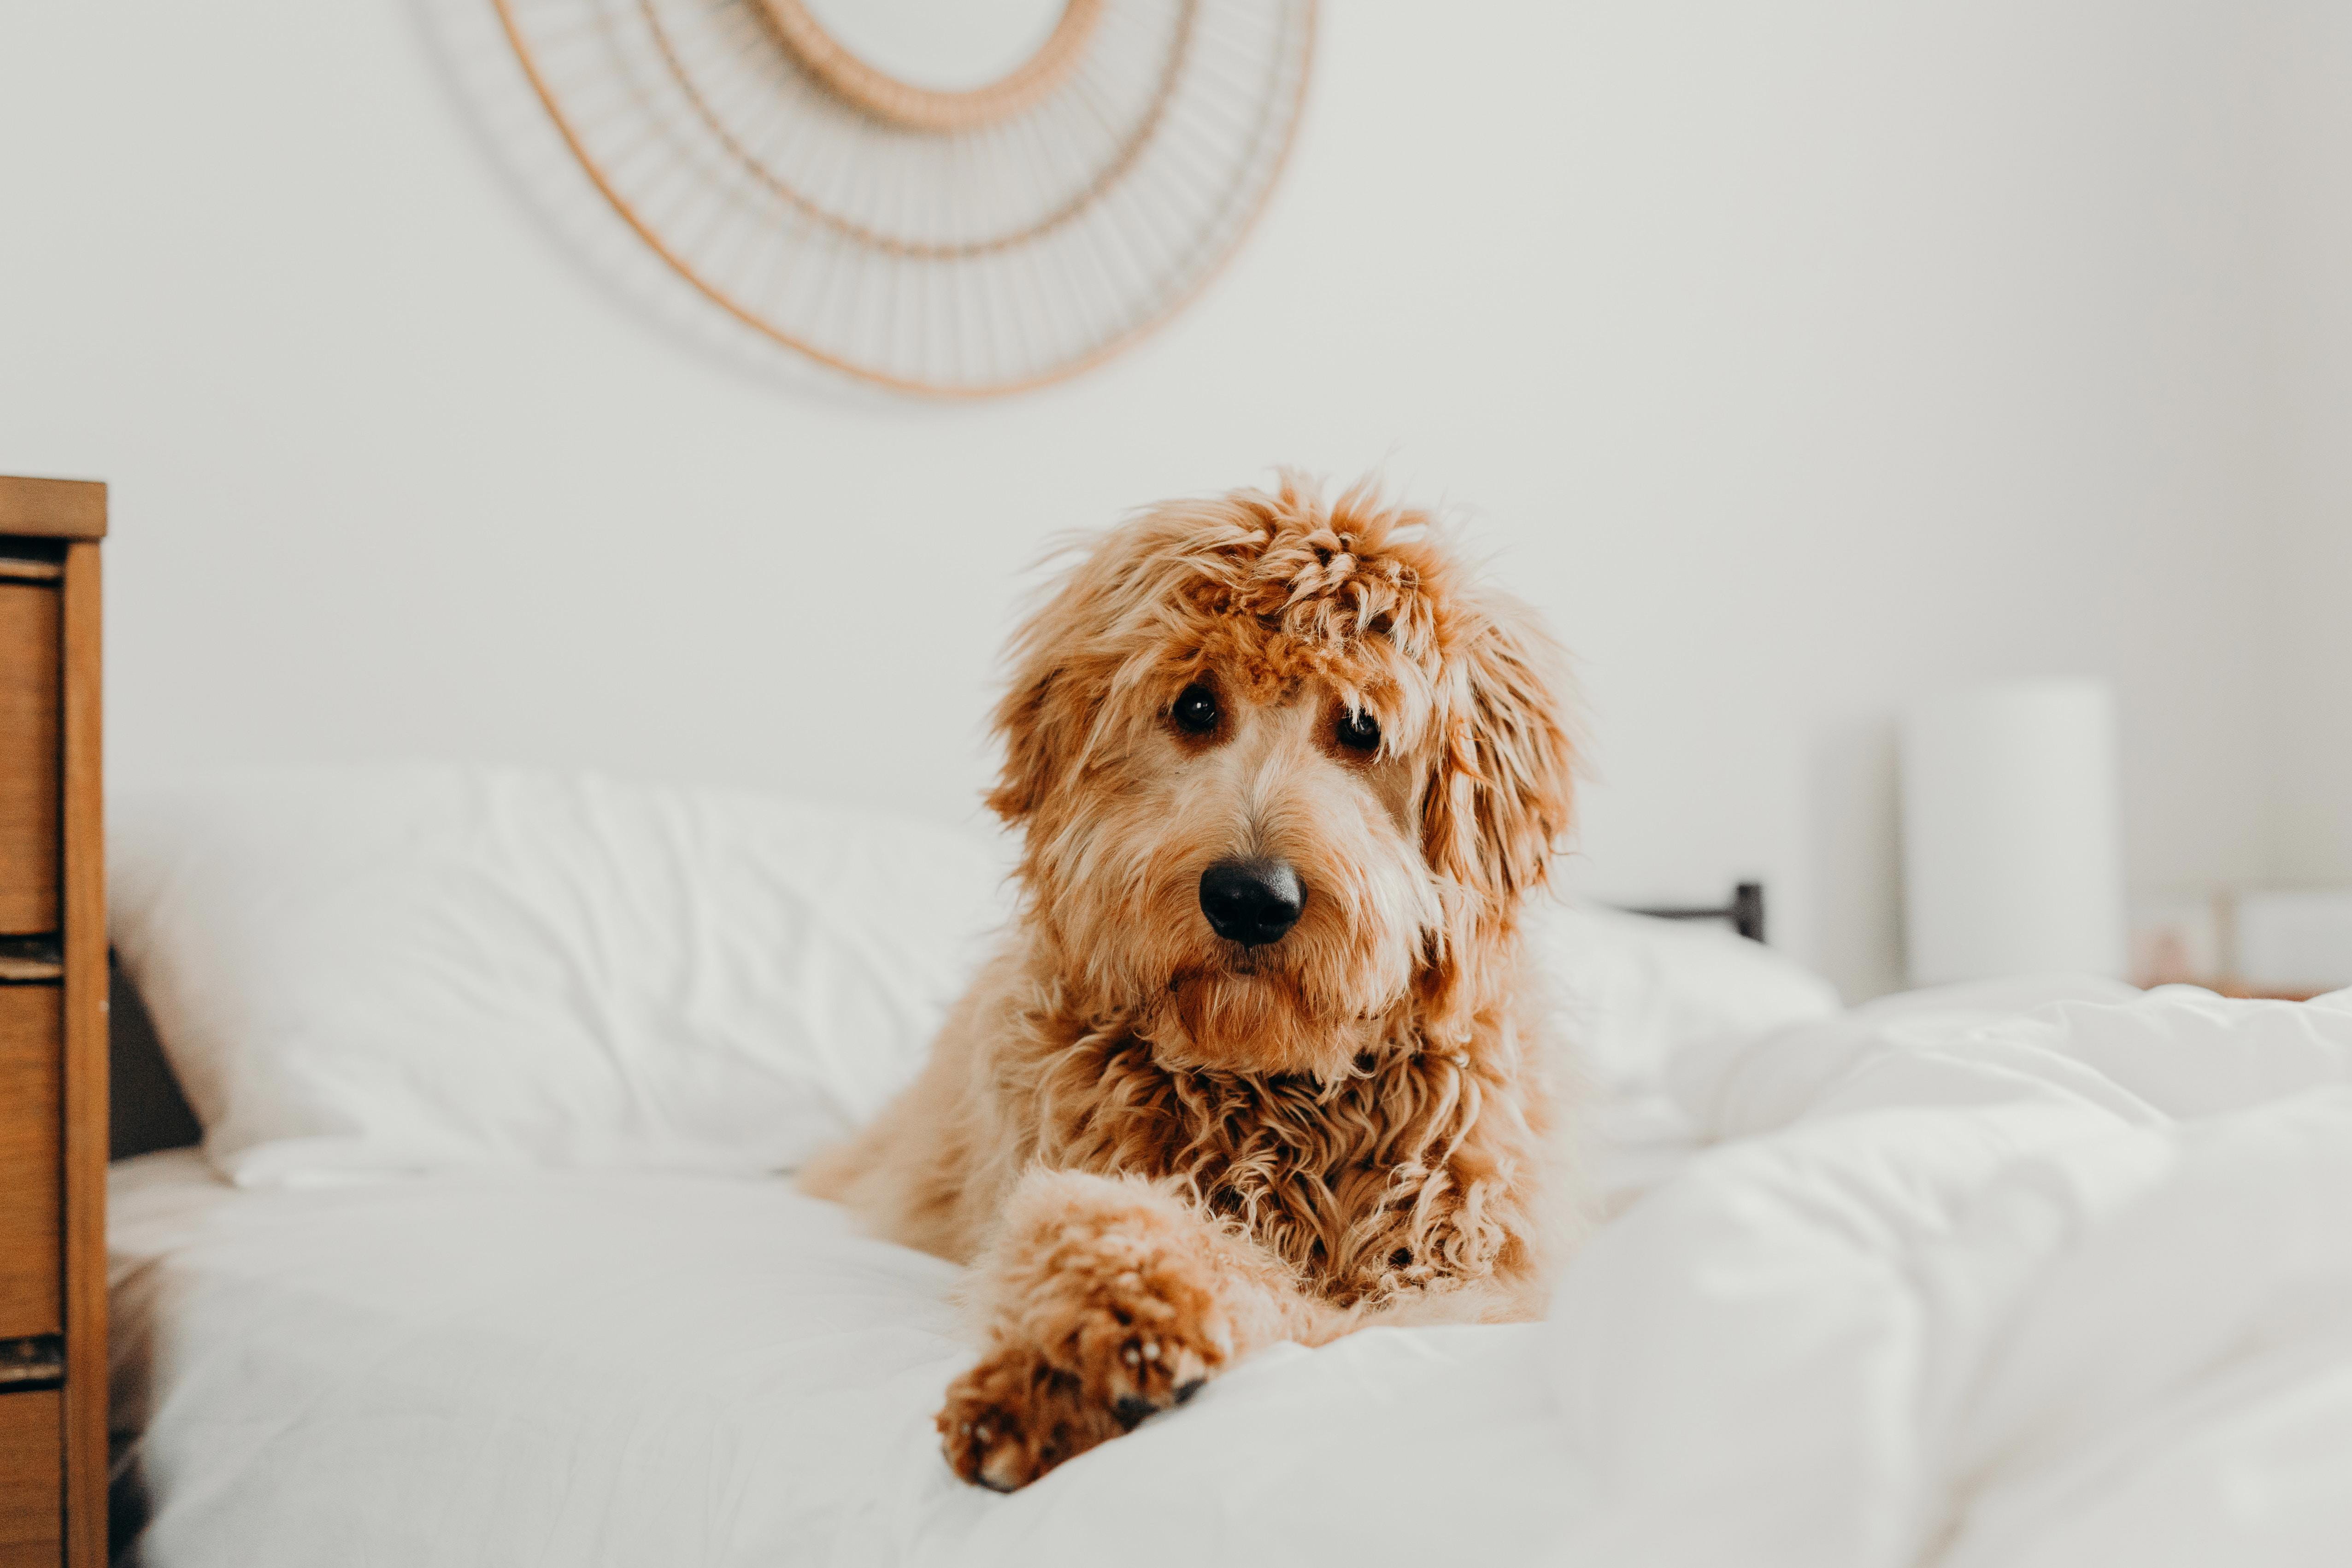 Are Goldendoodles High-Energy Dogs? Exploring the Hyperactive Goldendoodle Myth